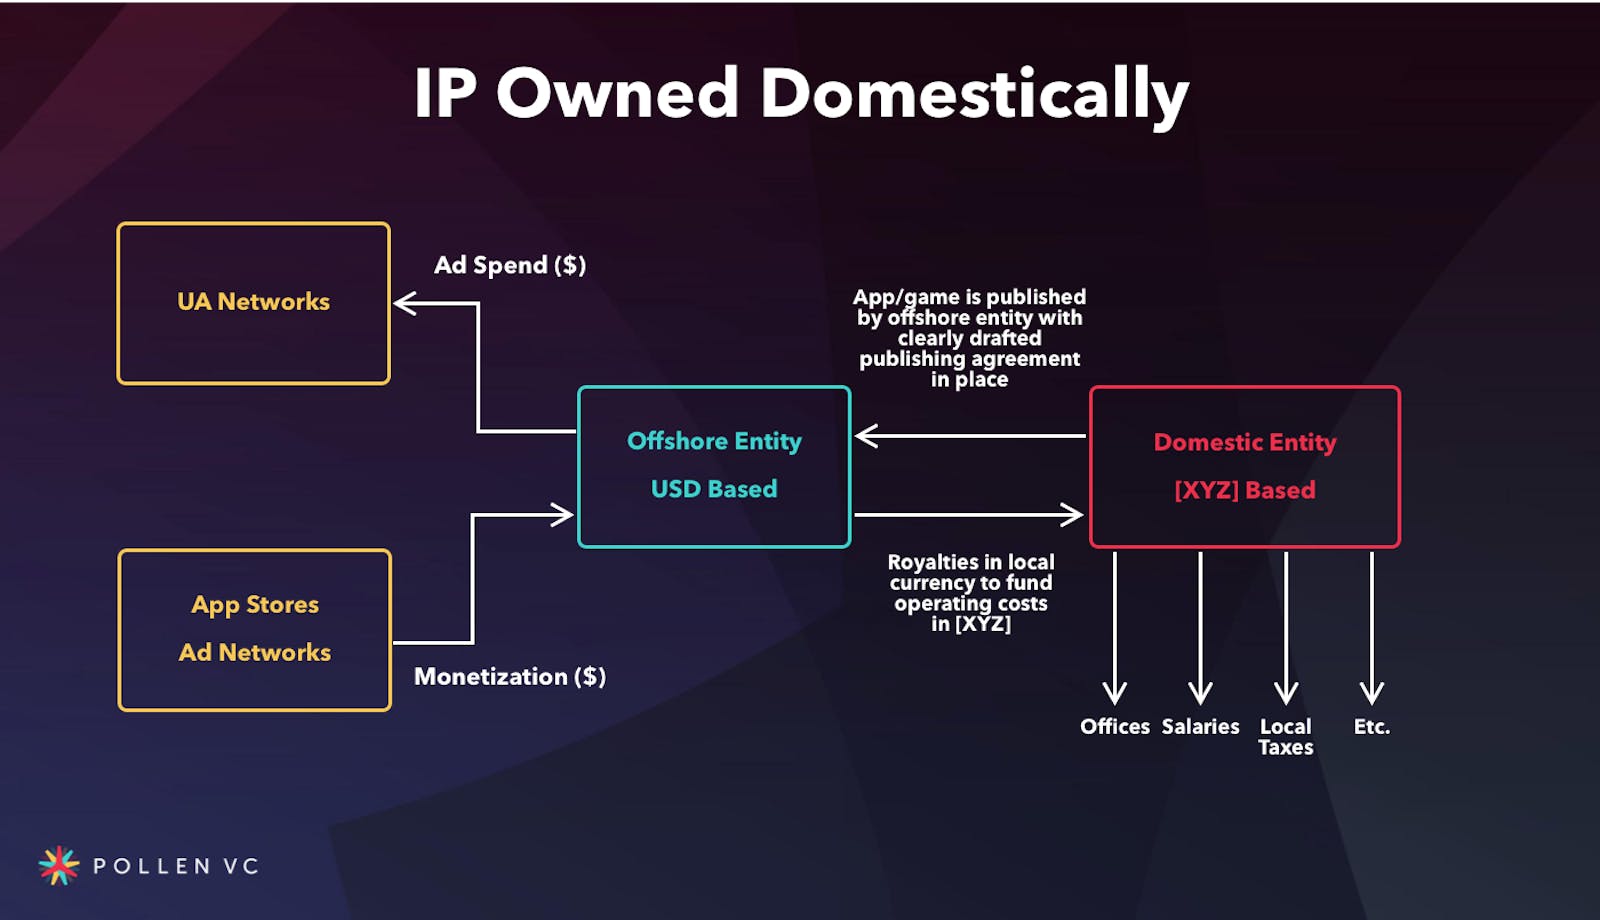 IP owned domestically